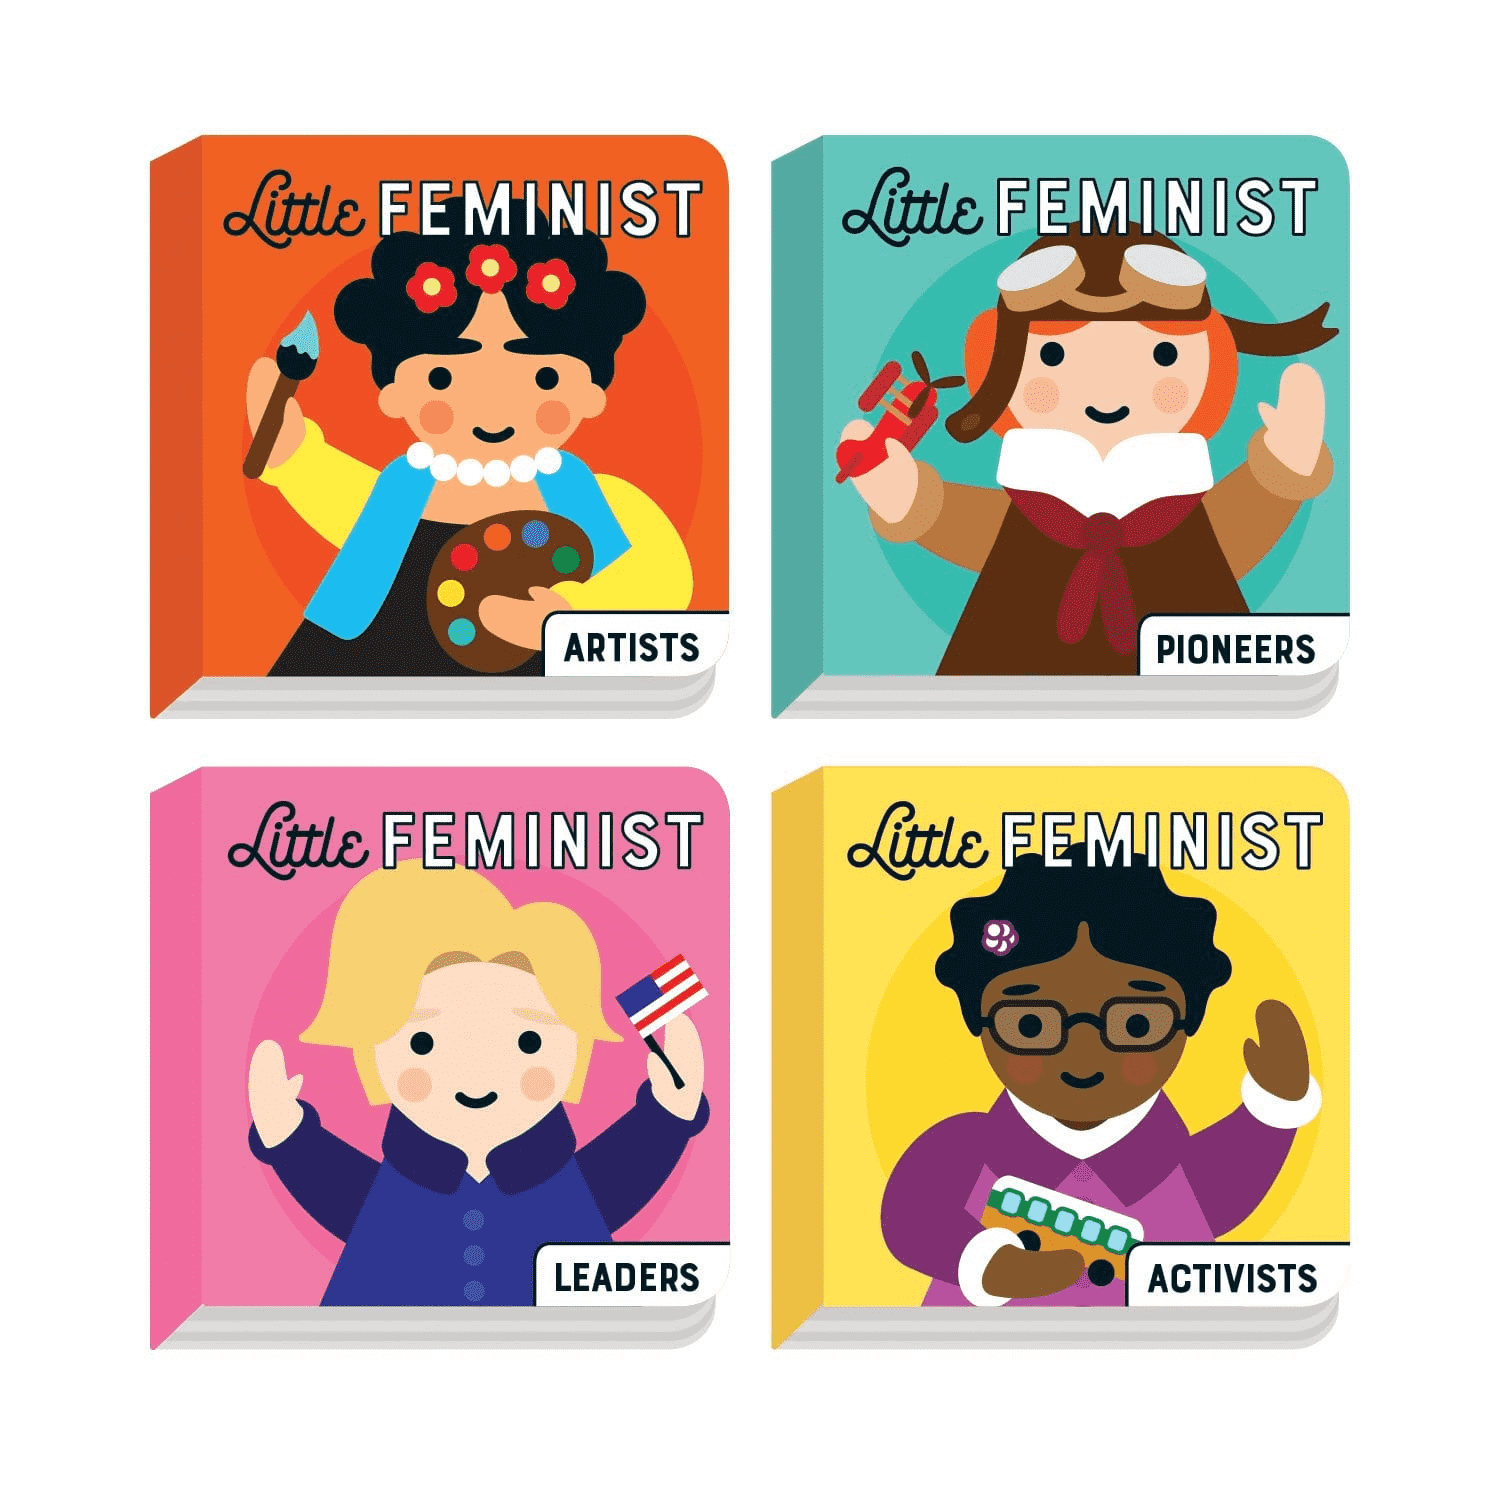 We Are Little Feminists - the board book series